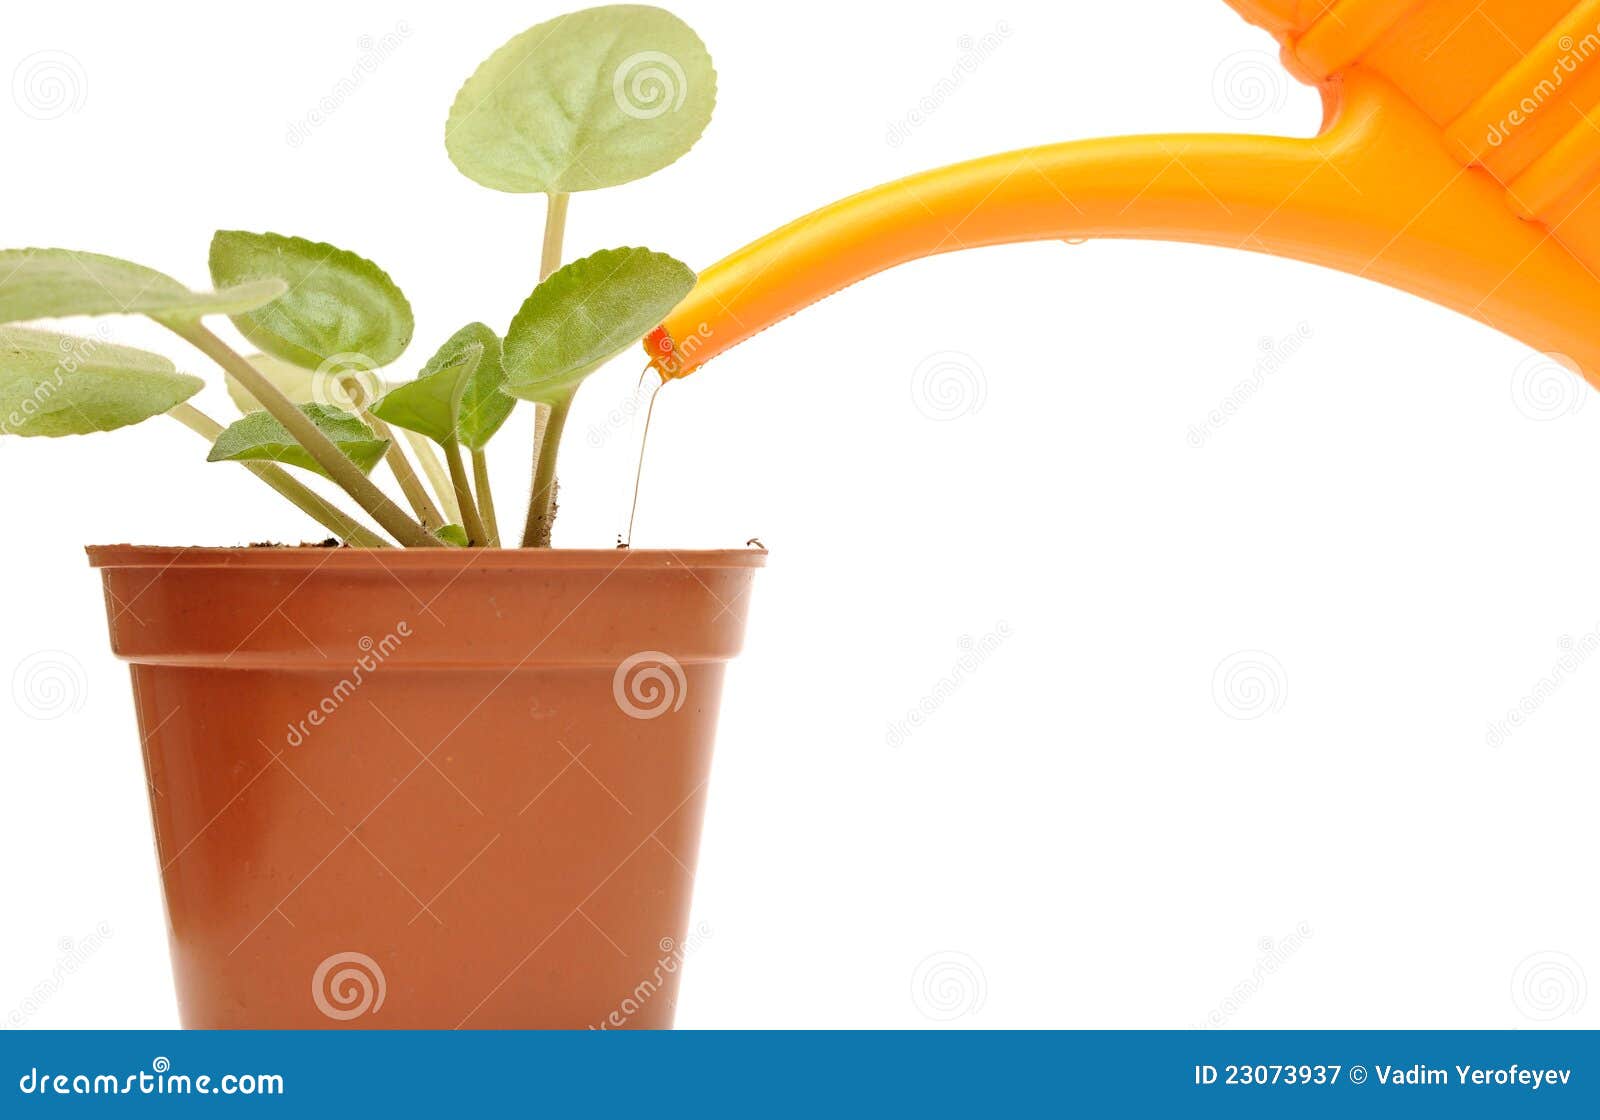 Closeup Hand Watering a Plant with Watering Can Stock Image - Image of ...